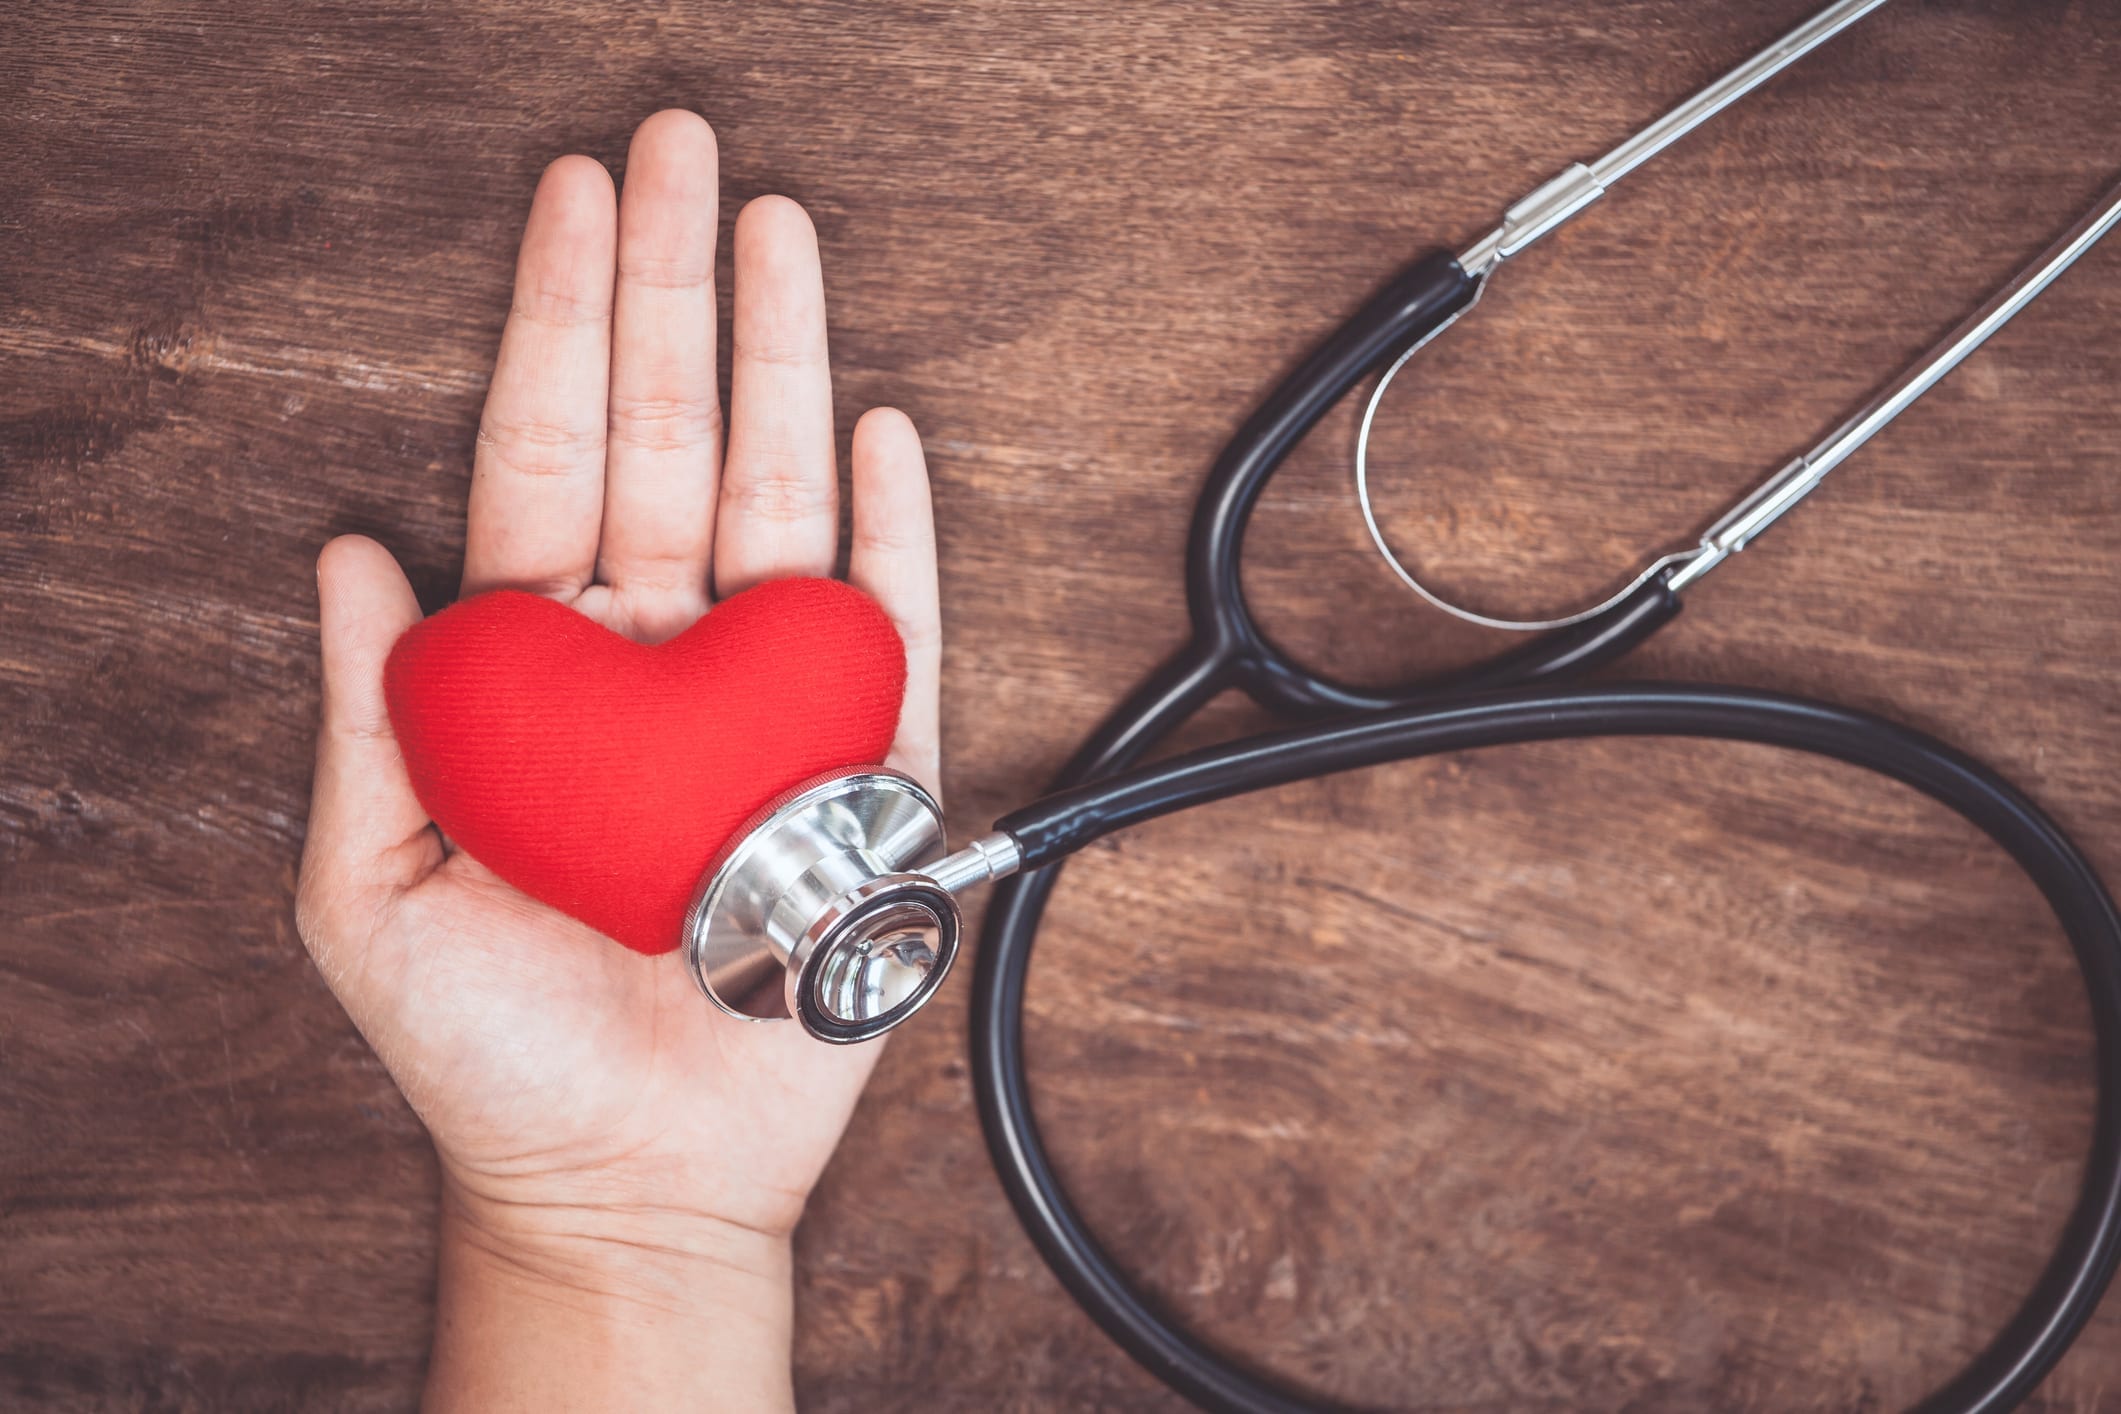 Here’s What Can Happen if You Don’t Take Care of Your Heart